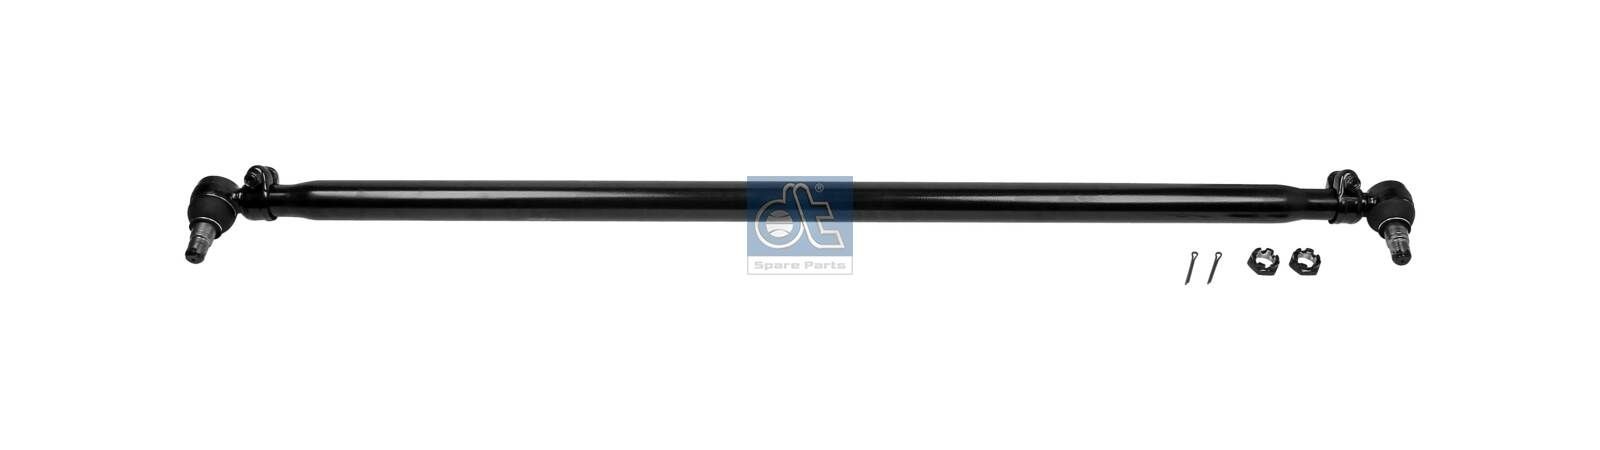 DT Spare Parts 7.30011 Rod Assembly 41032608